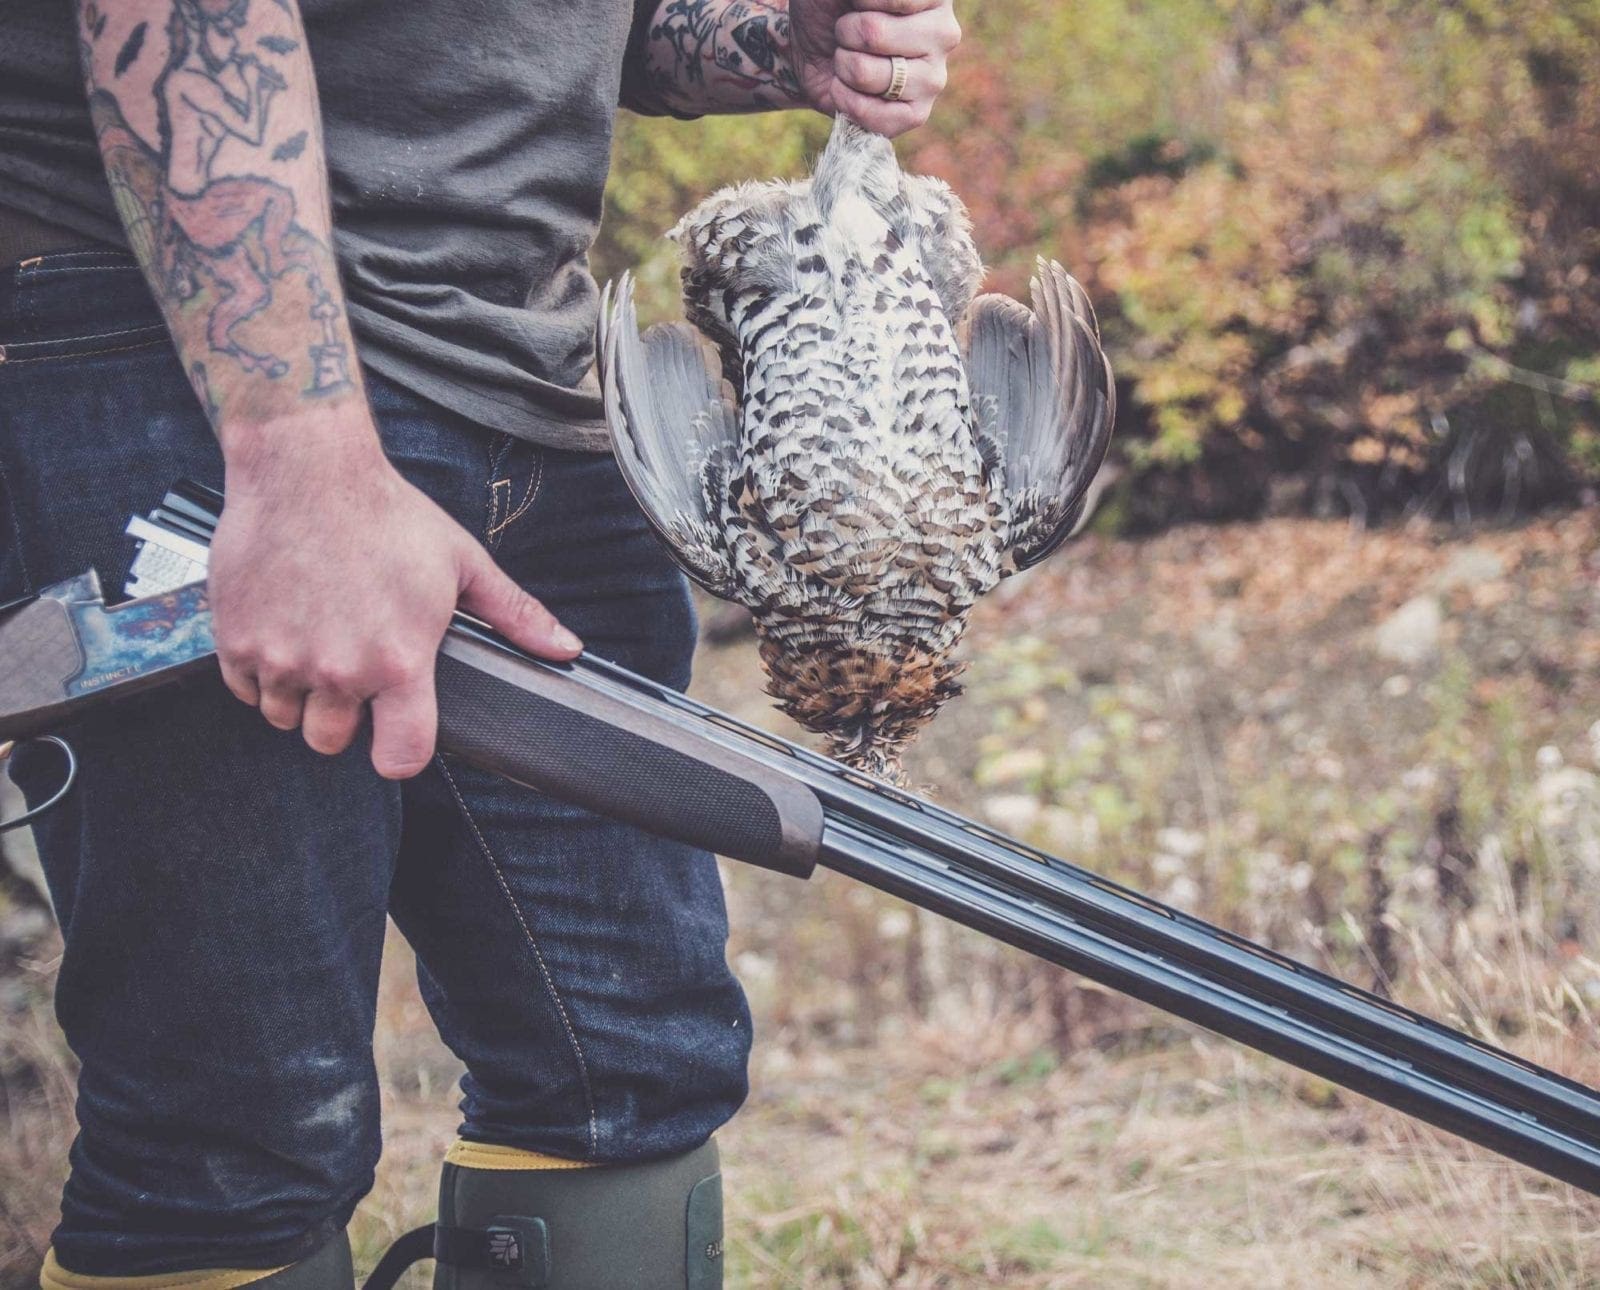 A bird hunter carries a Franchi Instinct L along with a ruffed grouse.